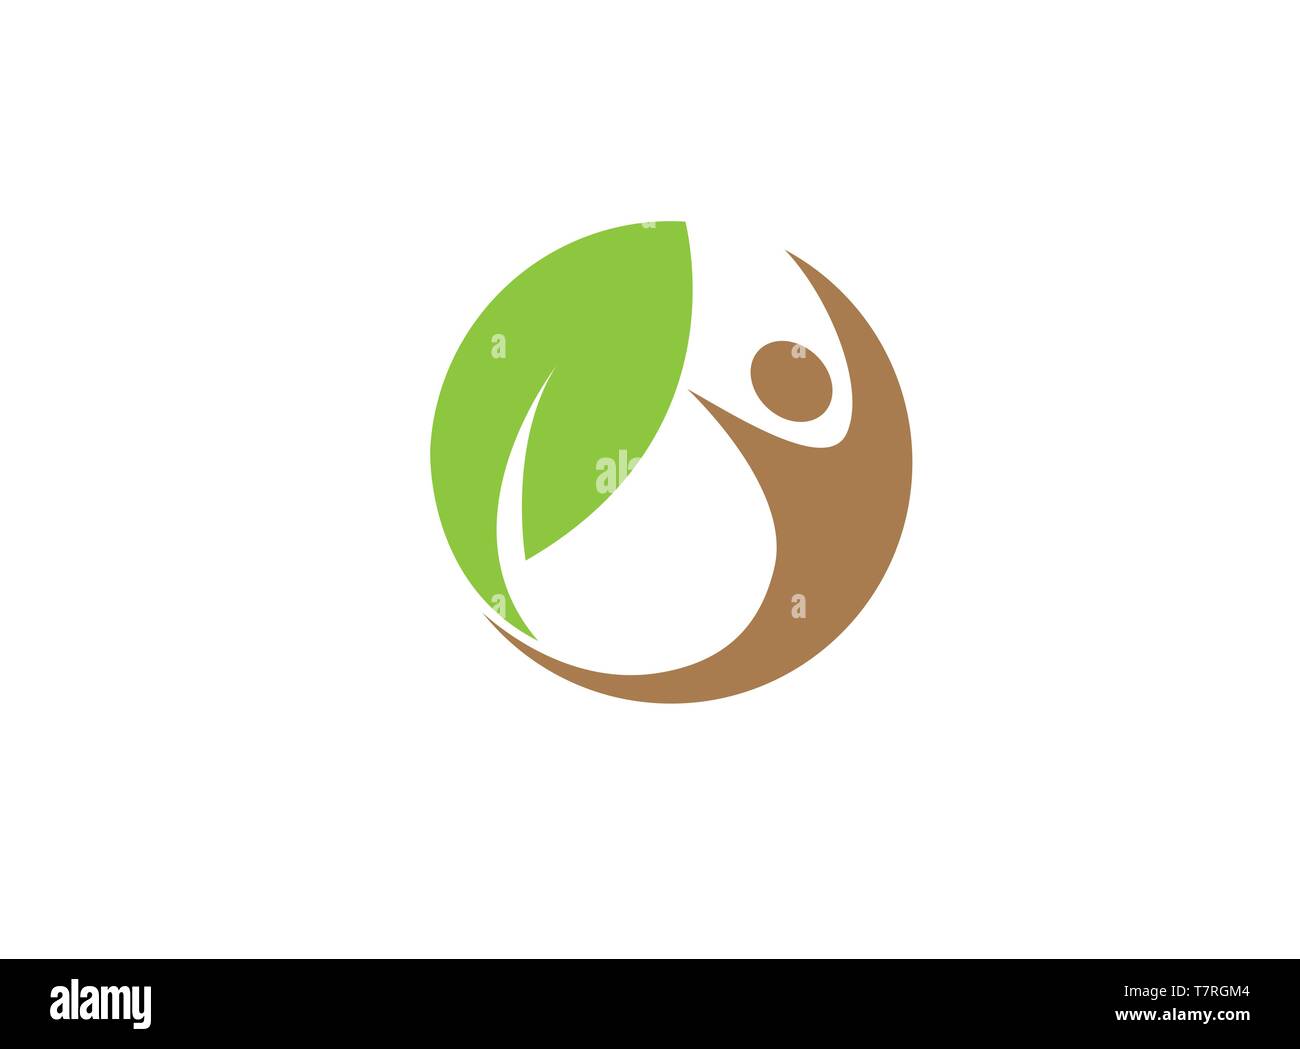 Healthy human nature and leaf in circle logo design illustration on white background Stock Vector